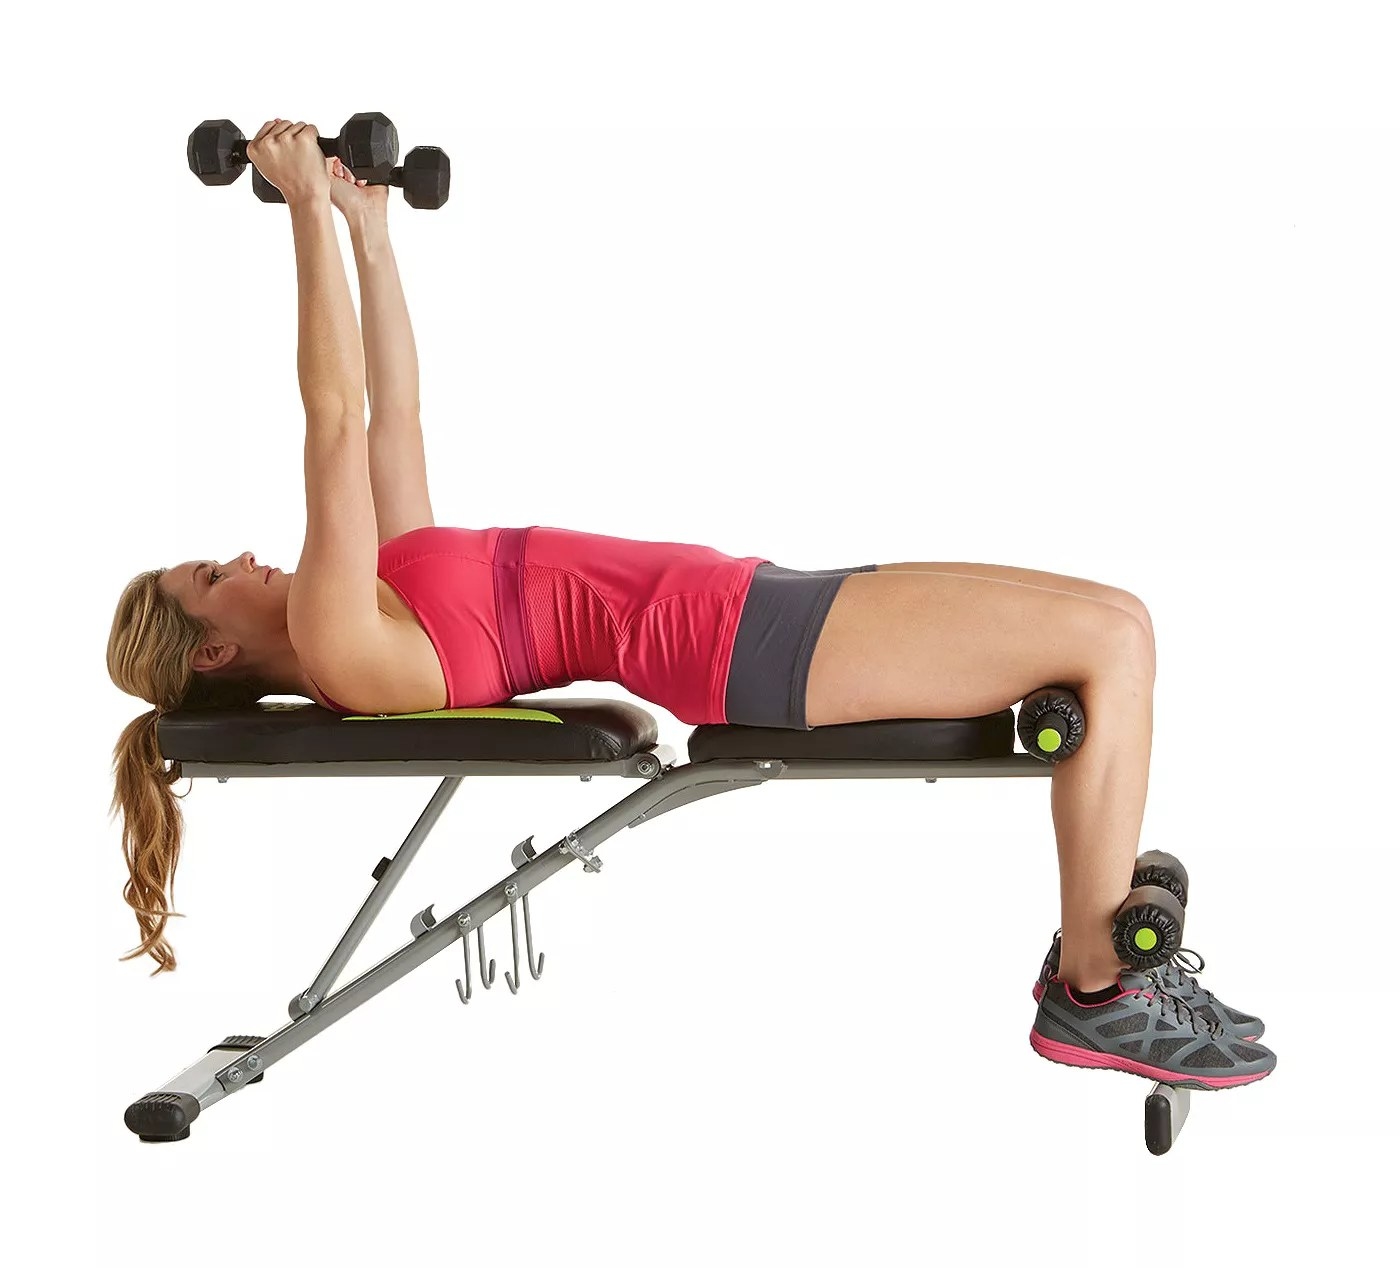 A model using the fitness bench at the lowest setting